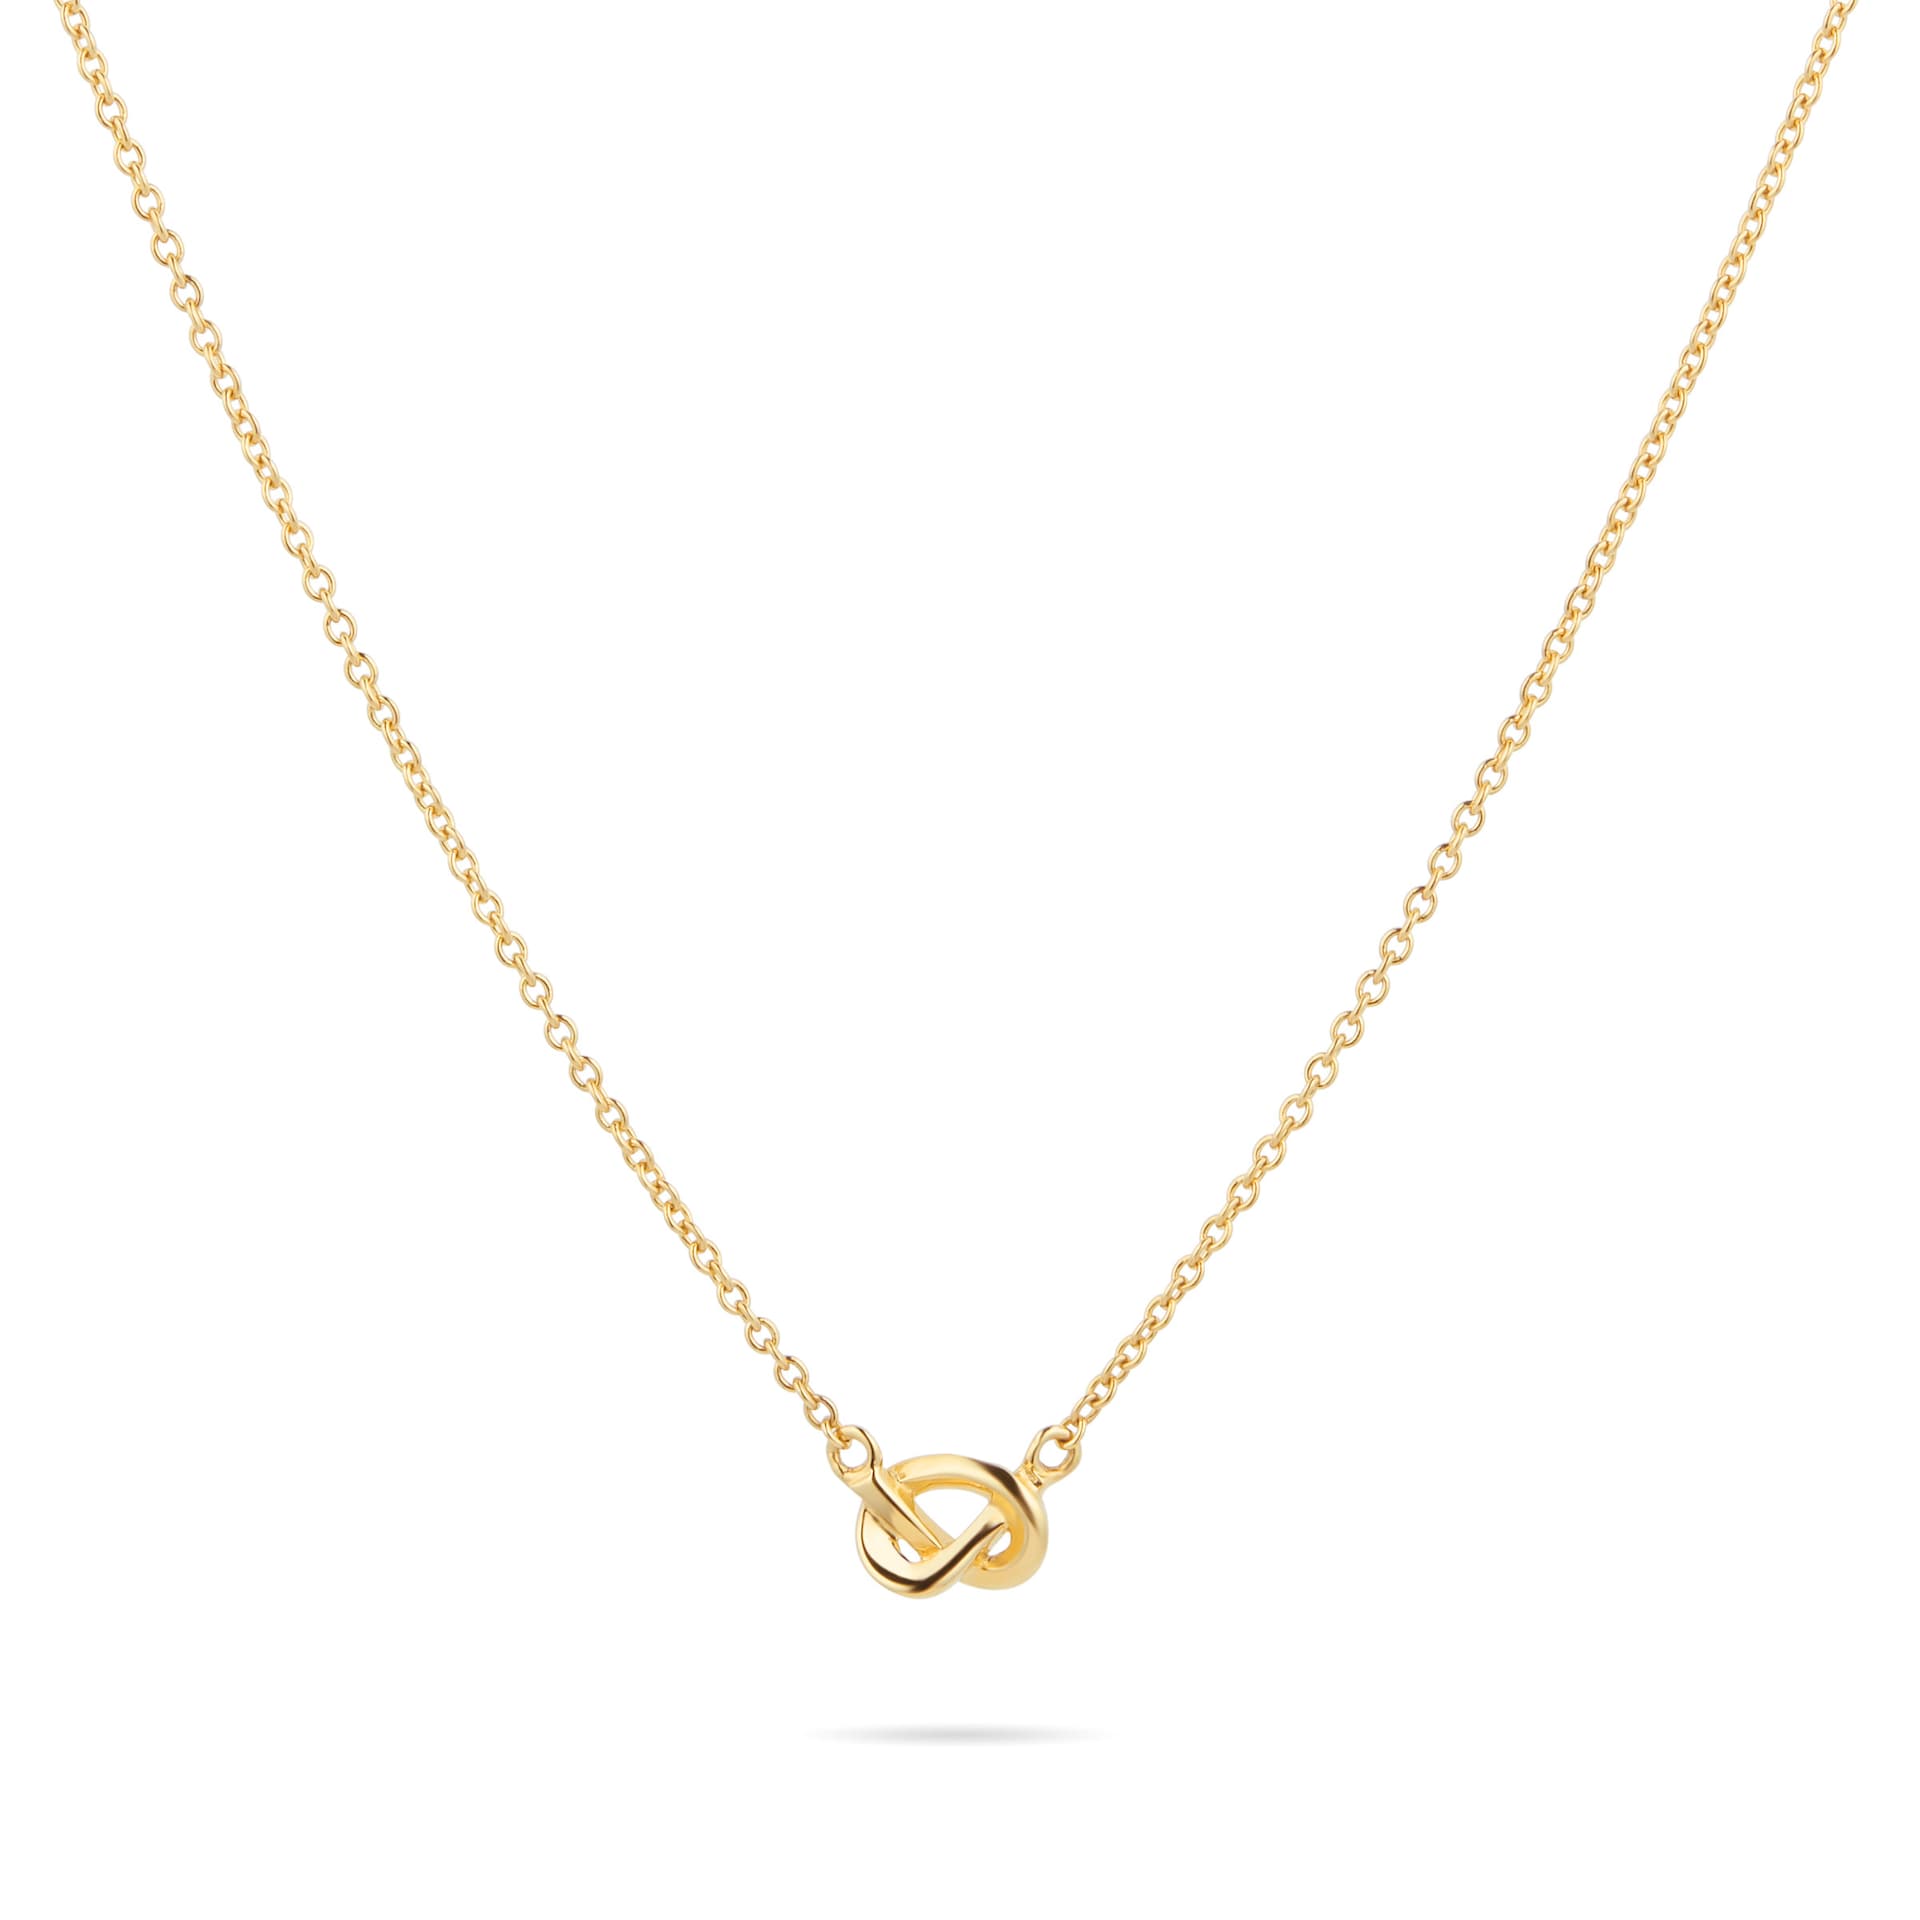 18ct Yellow Gold Knot Necklace